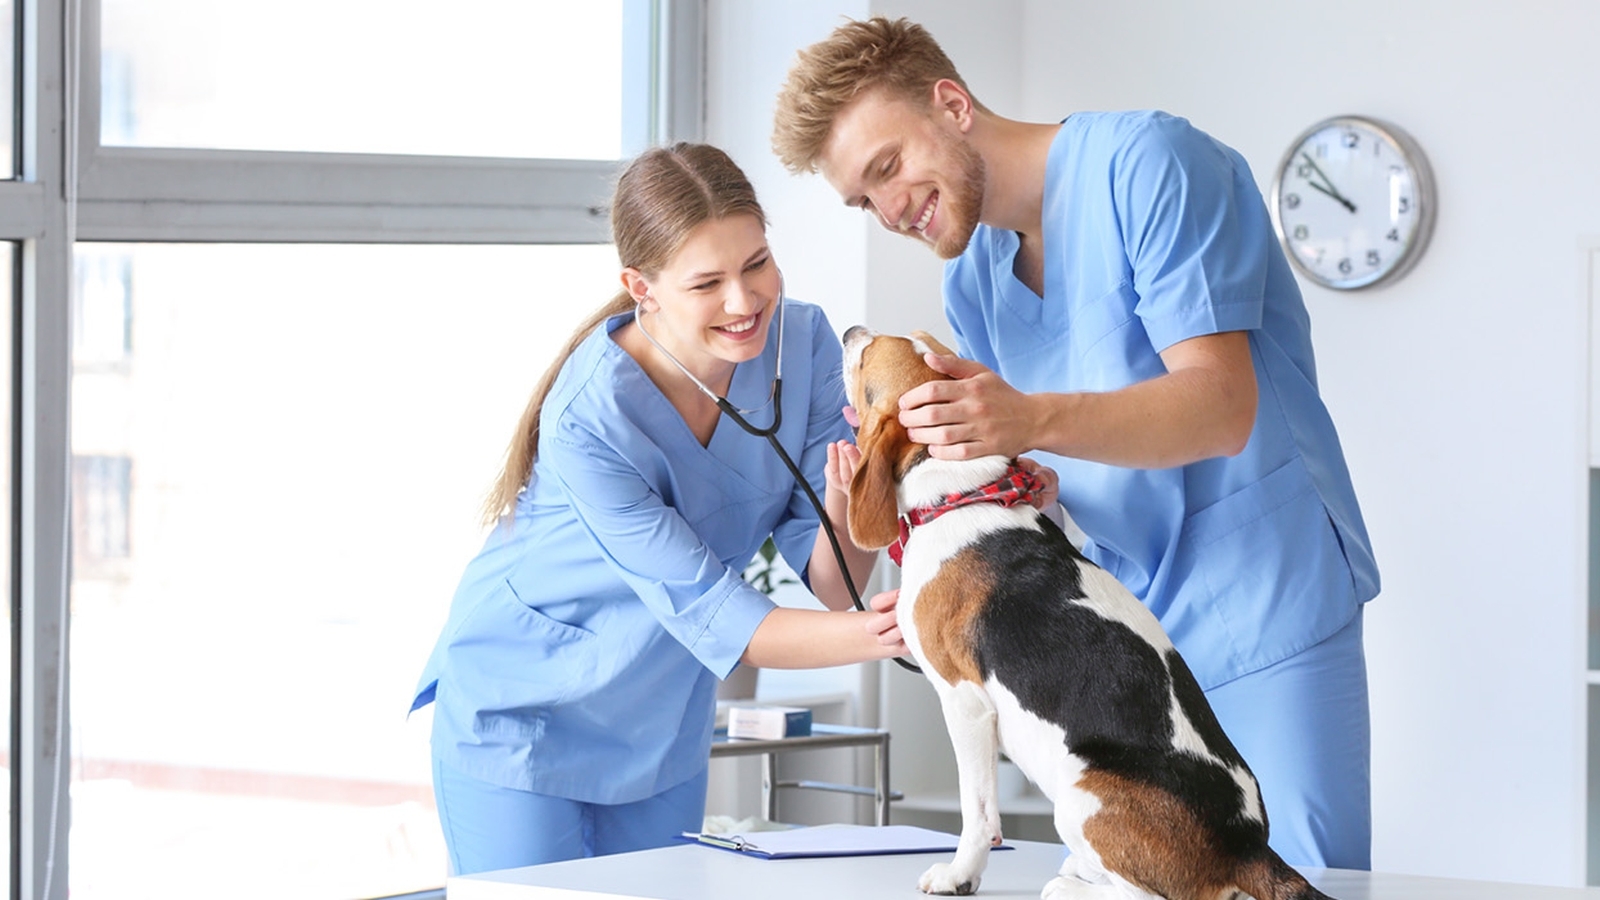 Two individuals examine a small dog on an exam room table